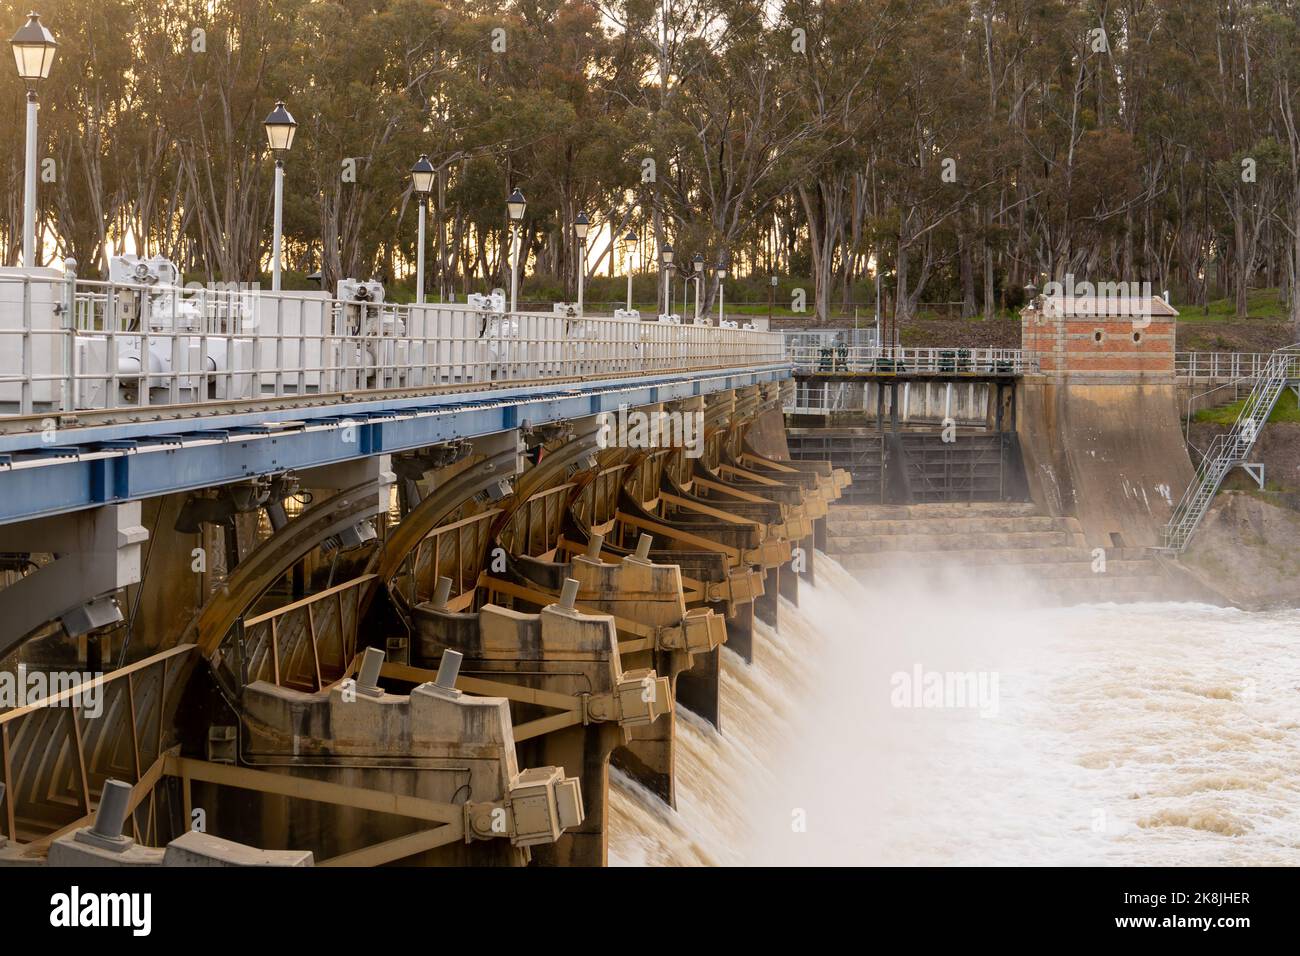 Water flowing through the Goulburn weir at dusk, on the Goulburn River, approximately 8 km north of Nagambie, Victoria, Australia. Stock Photo